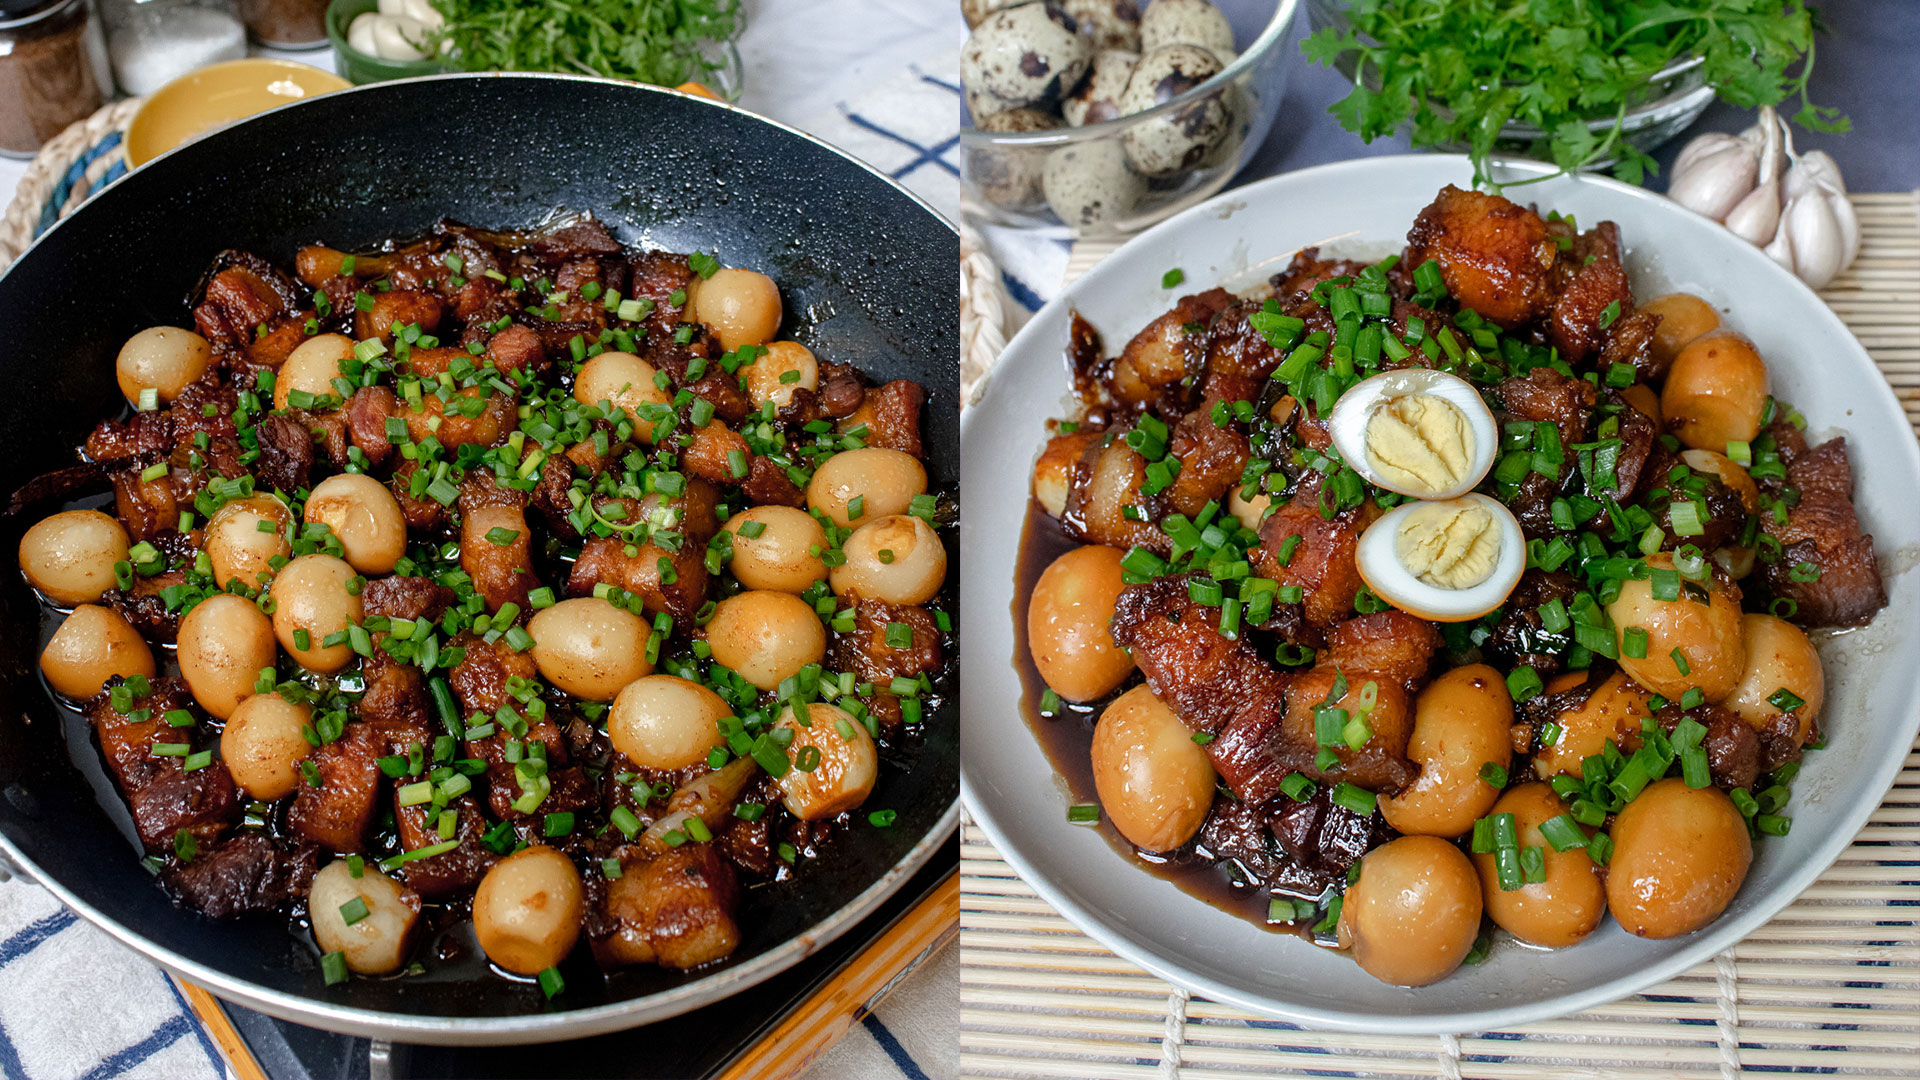 Quick and easy Pchum Ben recipe: Braised Pork Belly with Quail eggs!